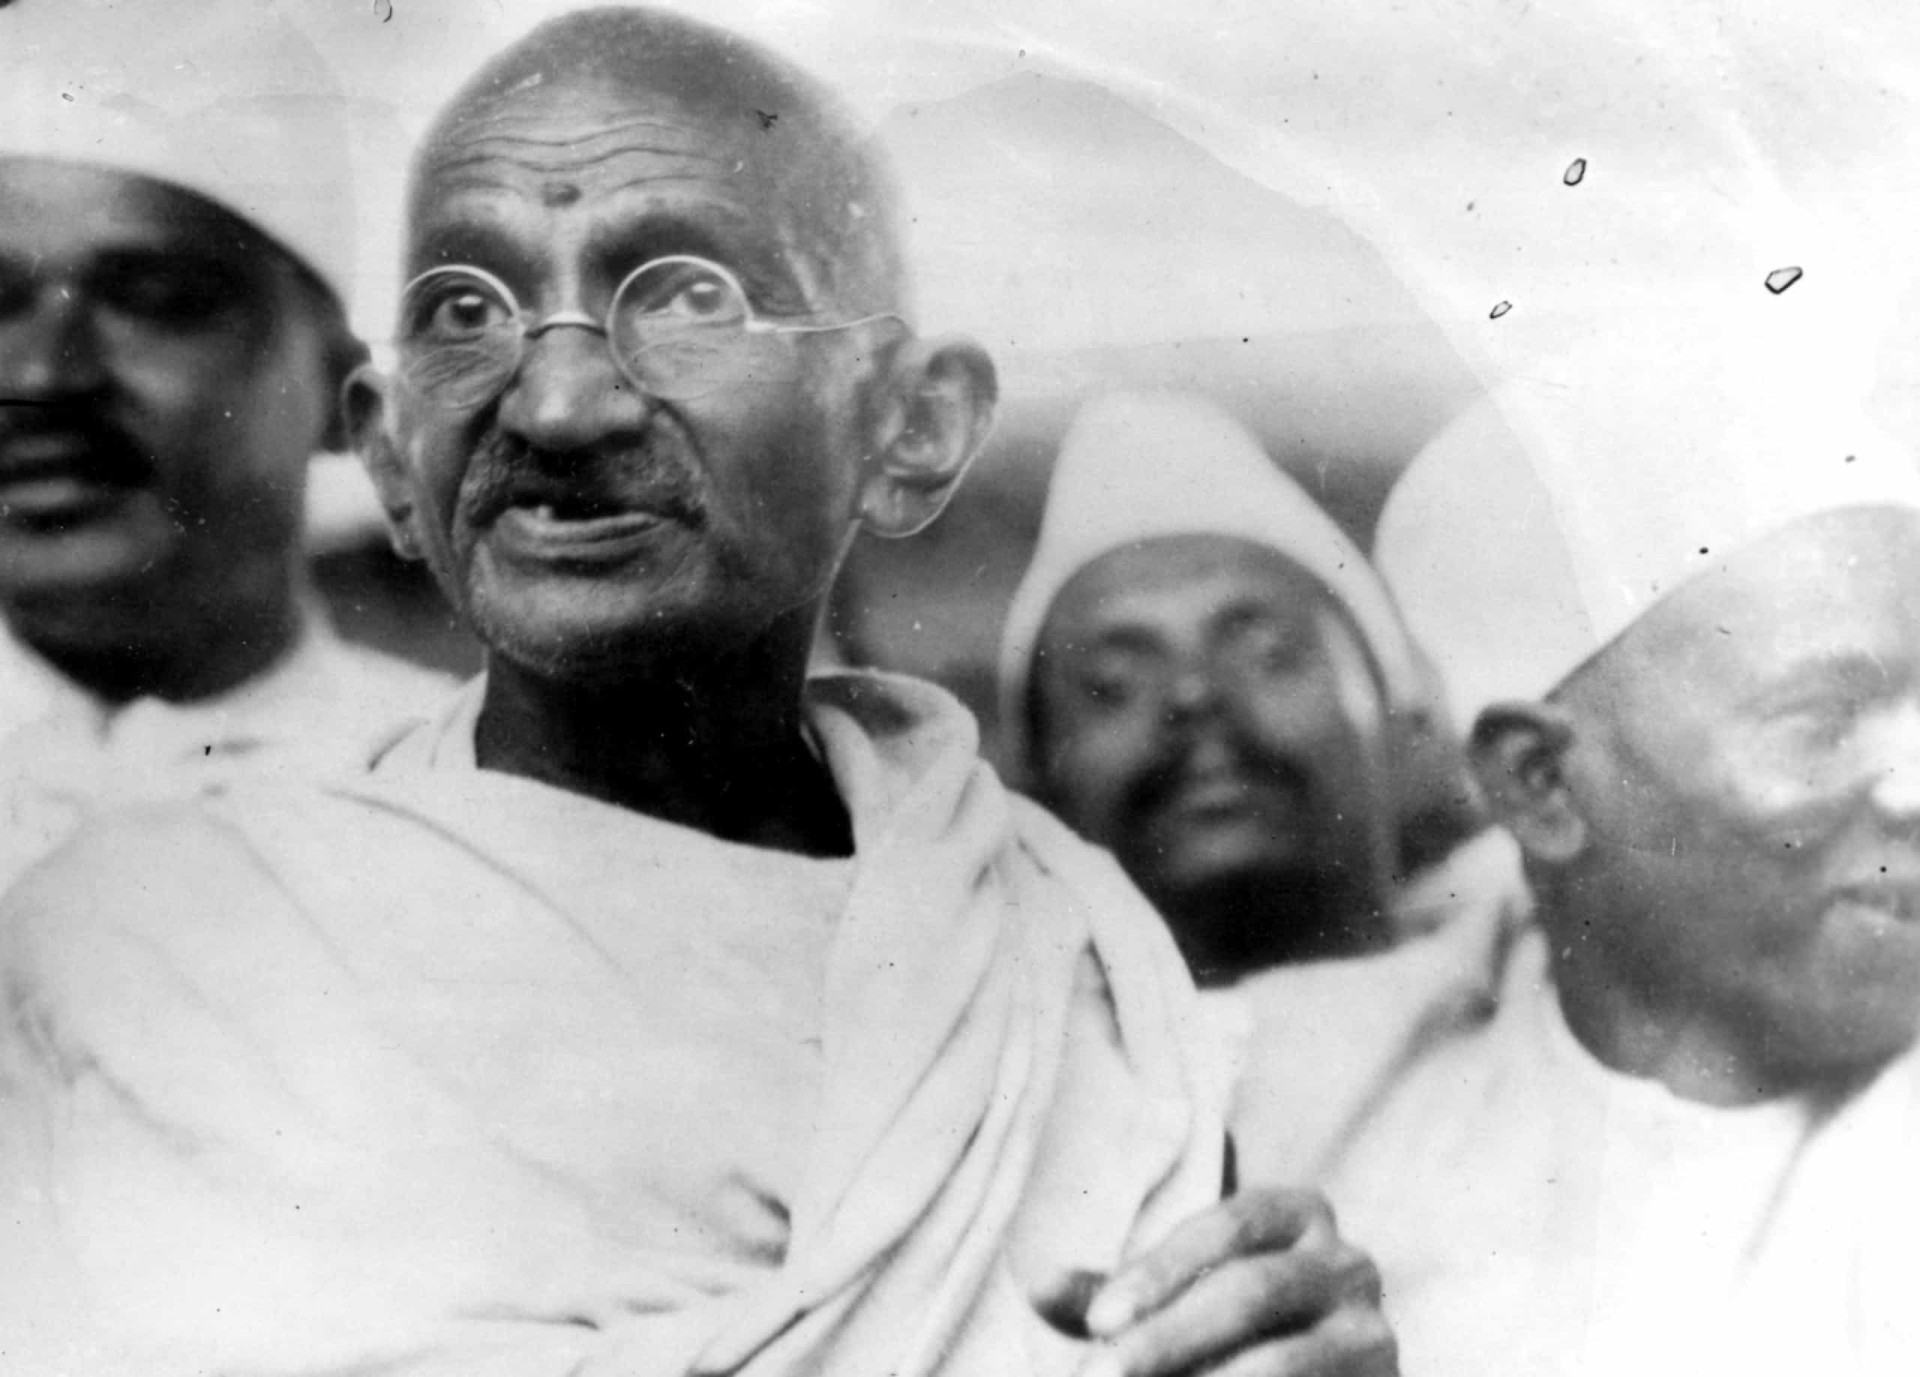 <p>Gandhi spoke to often huge crowds along the way. After arriving in Dandi, he was interned. A wave of beatings by police soon followed, resulting in 300 or so protesters seriously injured. Peaceful resistance had again turned ugly, but at no time did the marchers offer any resistance.</p><p>You may also like:<a href="https://www.starsinsider.com/n/449702?utm_source=msn.com&utm_medium=display&utm_campaign=referral_description&utm_content=447666v5en-us"> The most mind-bending movies ever made</a></p>